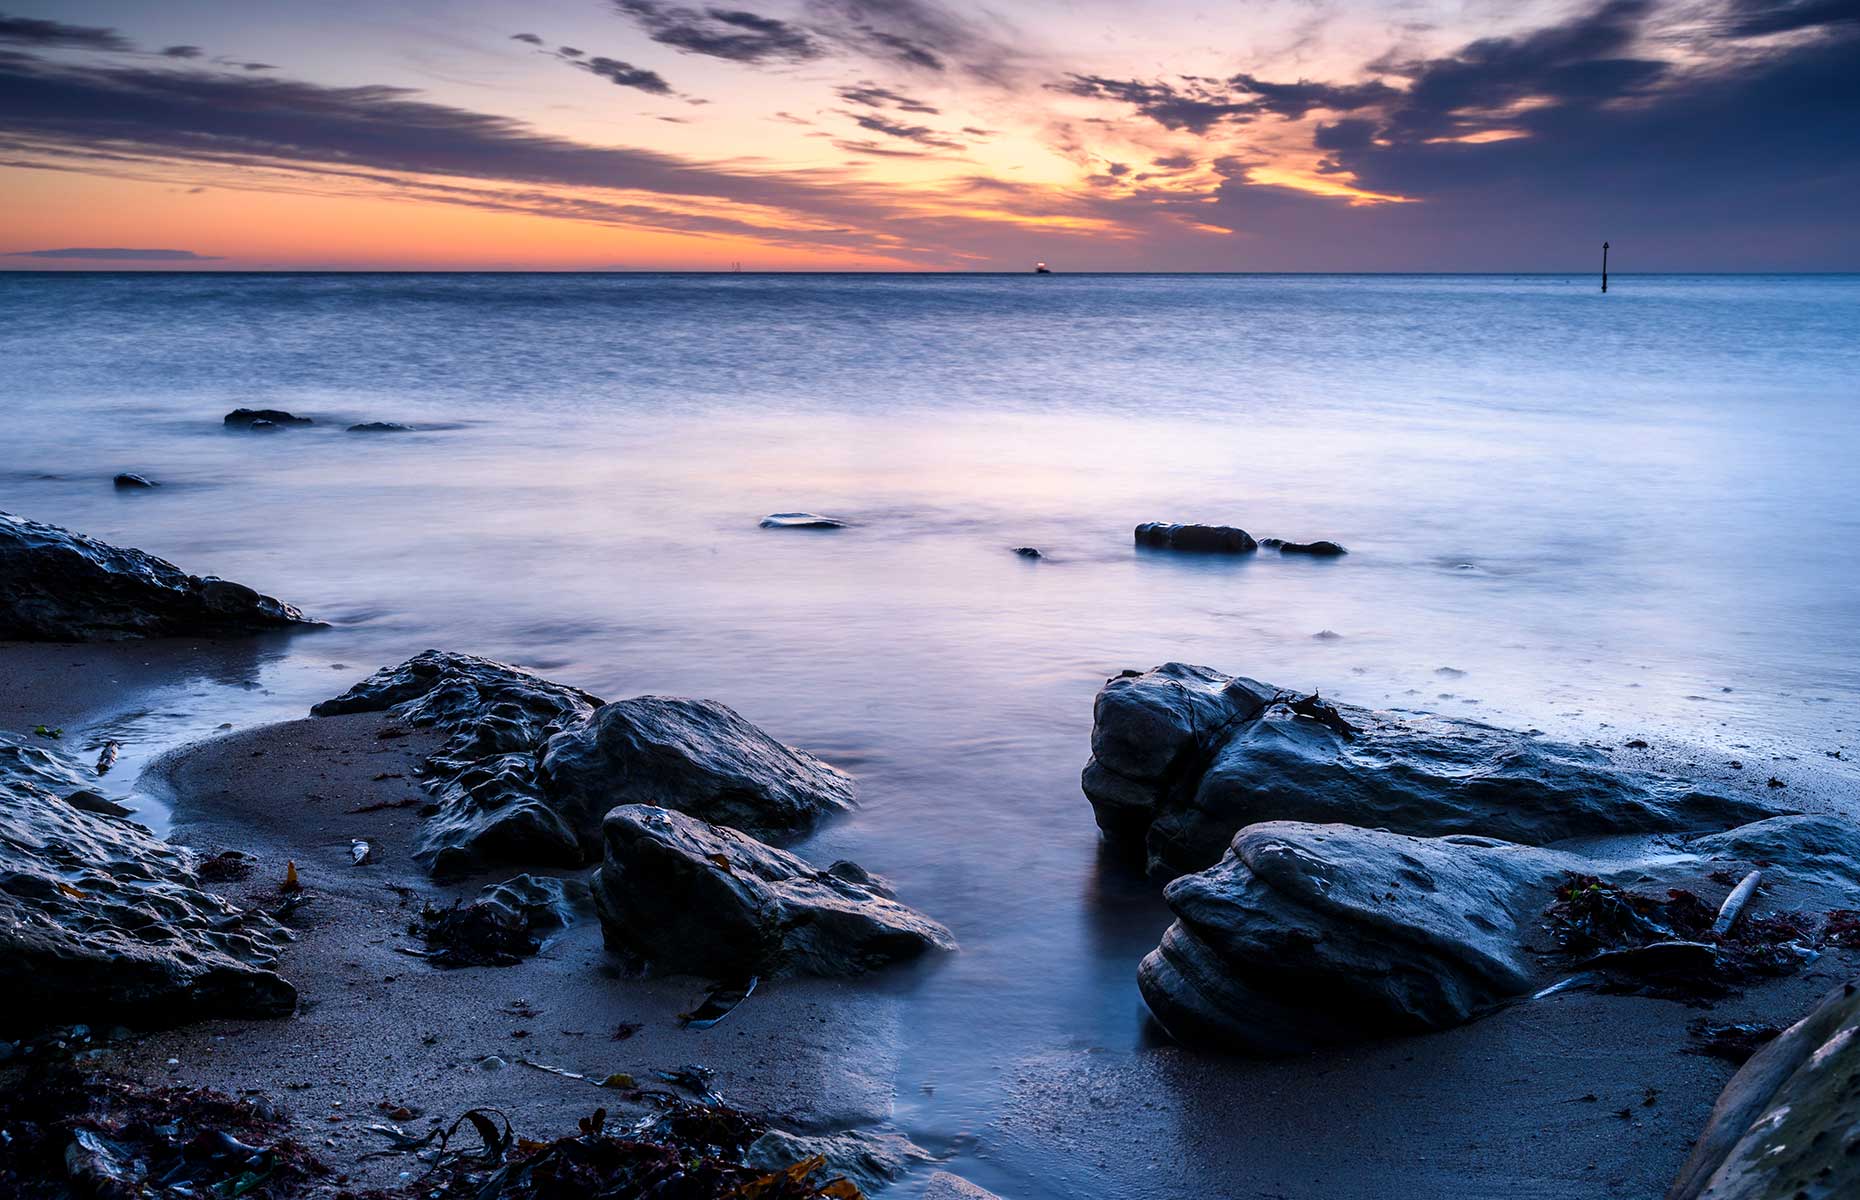 Kingsbarns Beach, also known as Cambo Sands, Scotland (Image: Scott Jessiman Photo/Shutterstock)